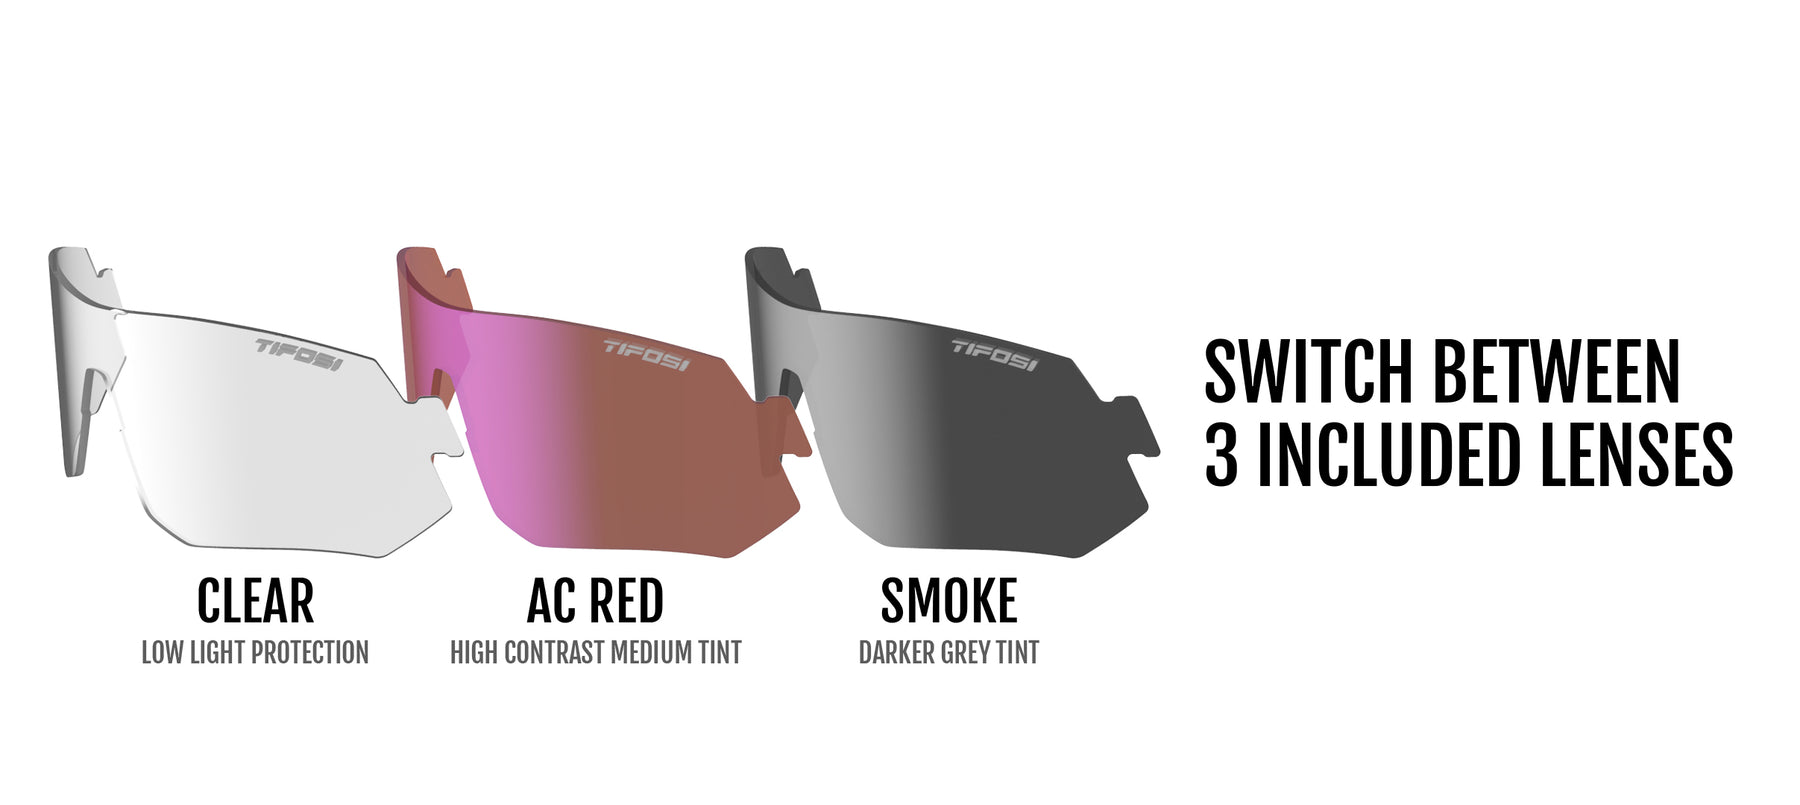 image showing a clear, all-conditions red, and Smoke lens for Tsali model sunglass